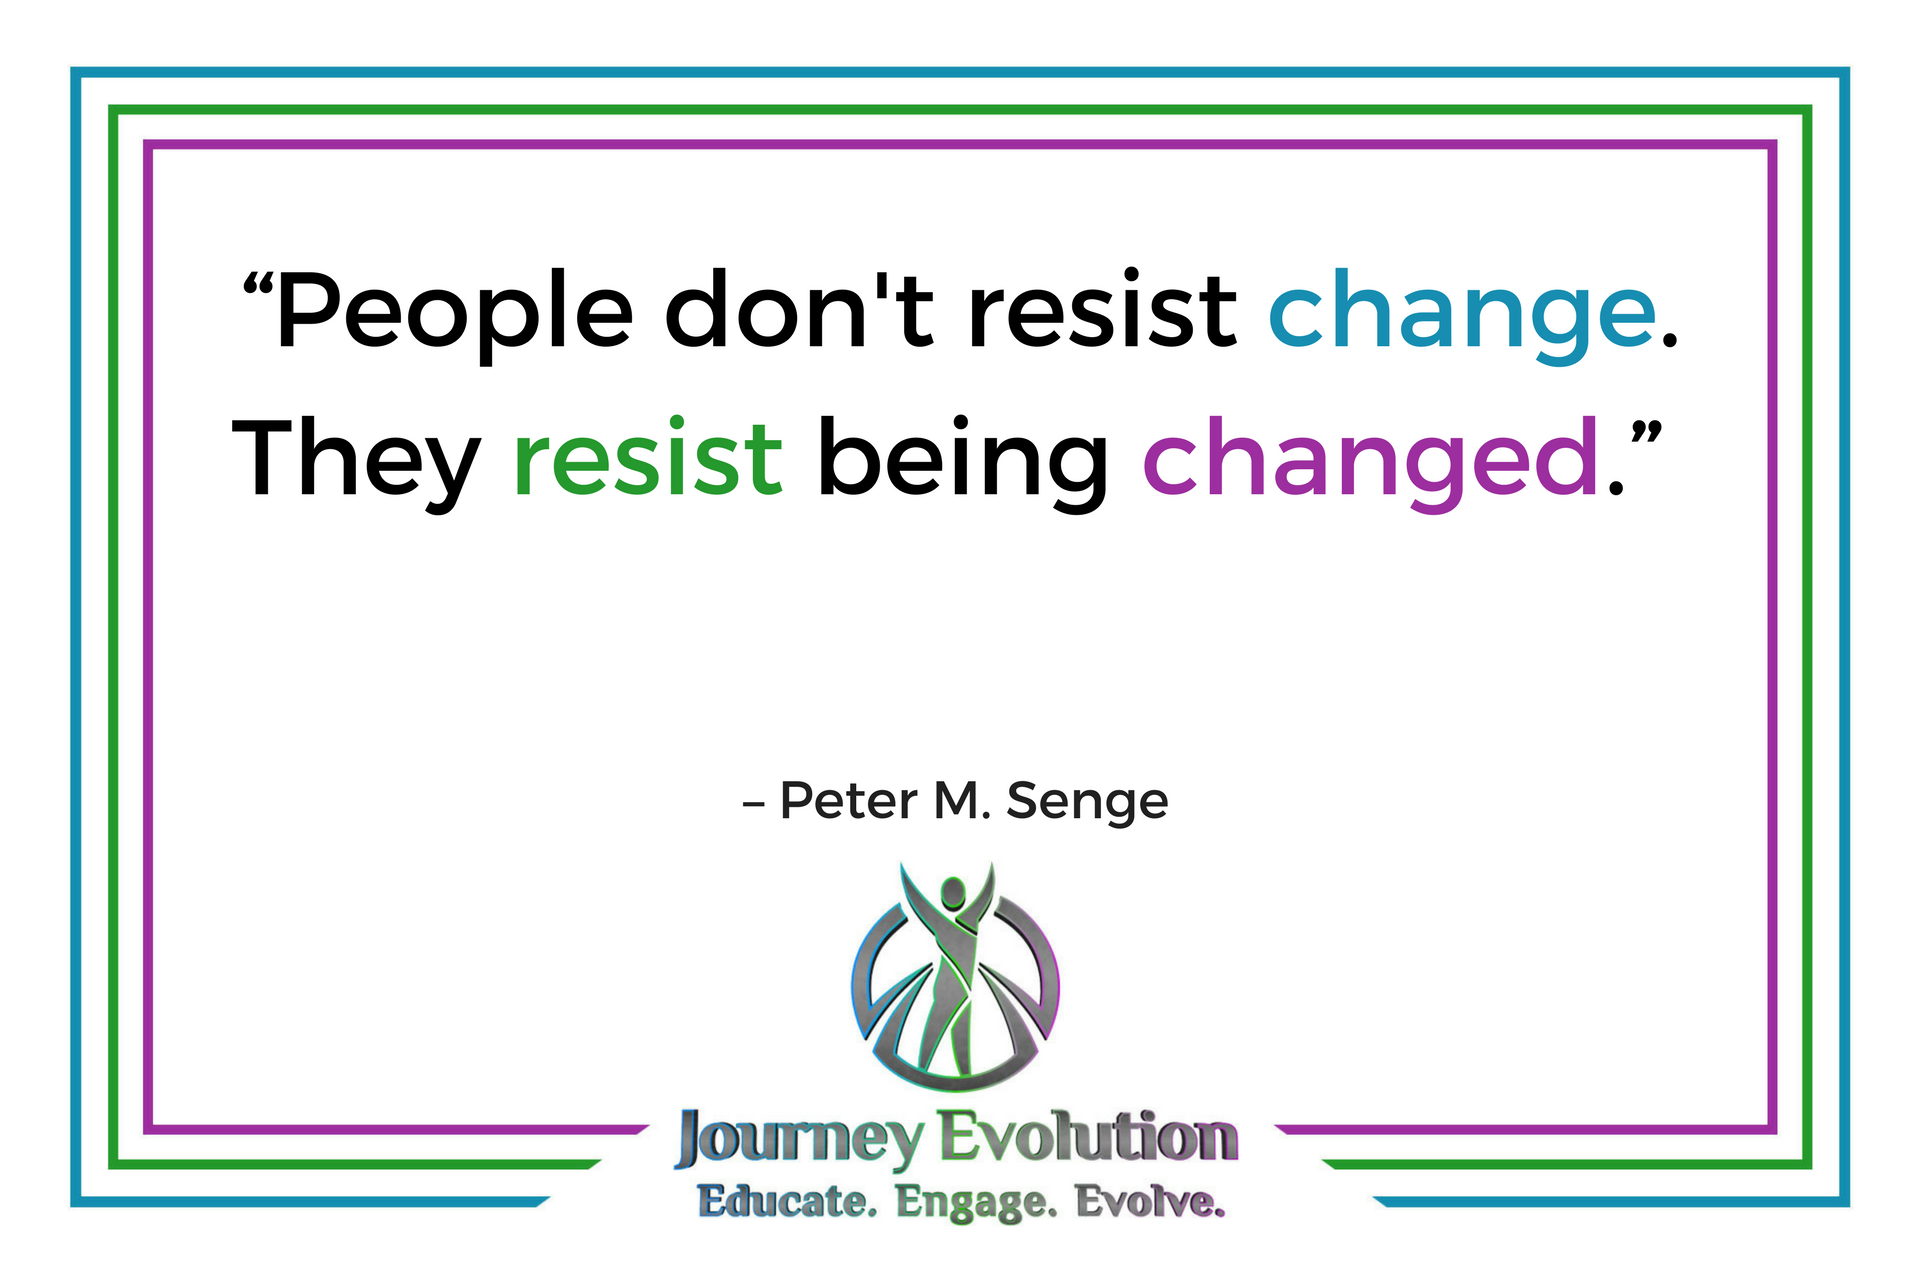 Are You Resistant to Change?